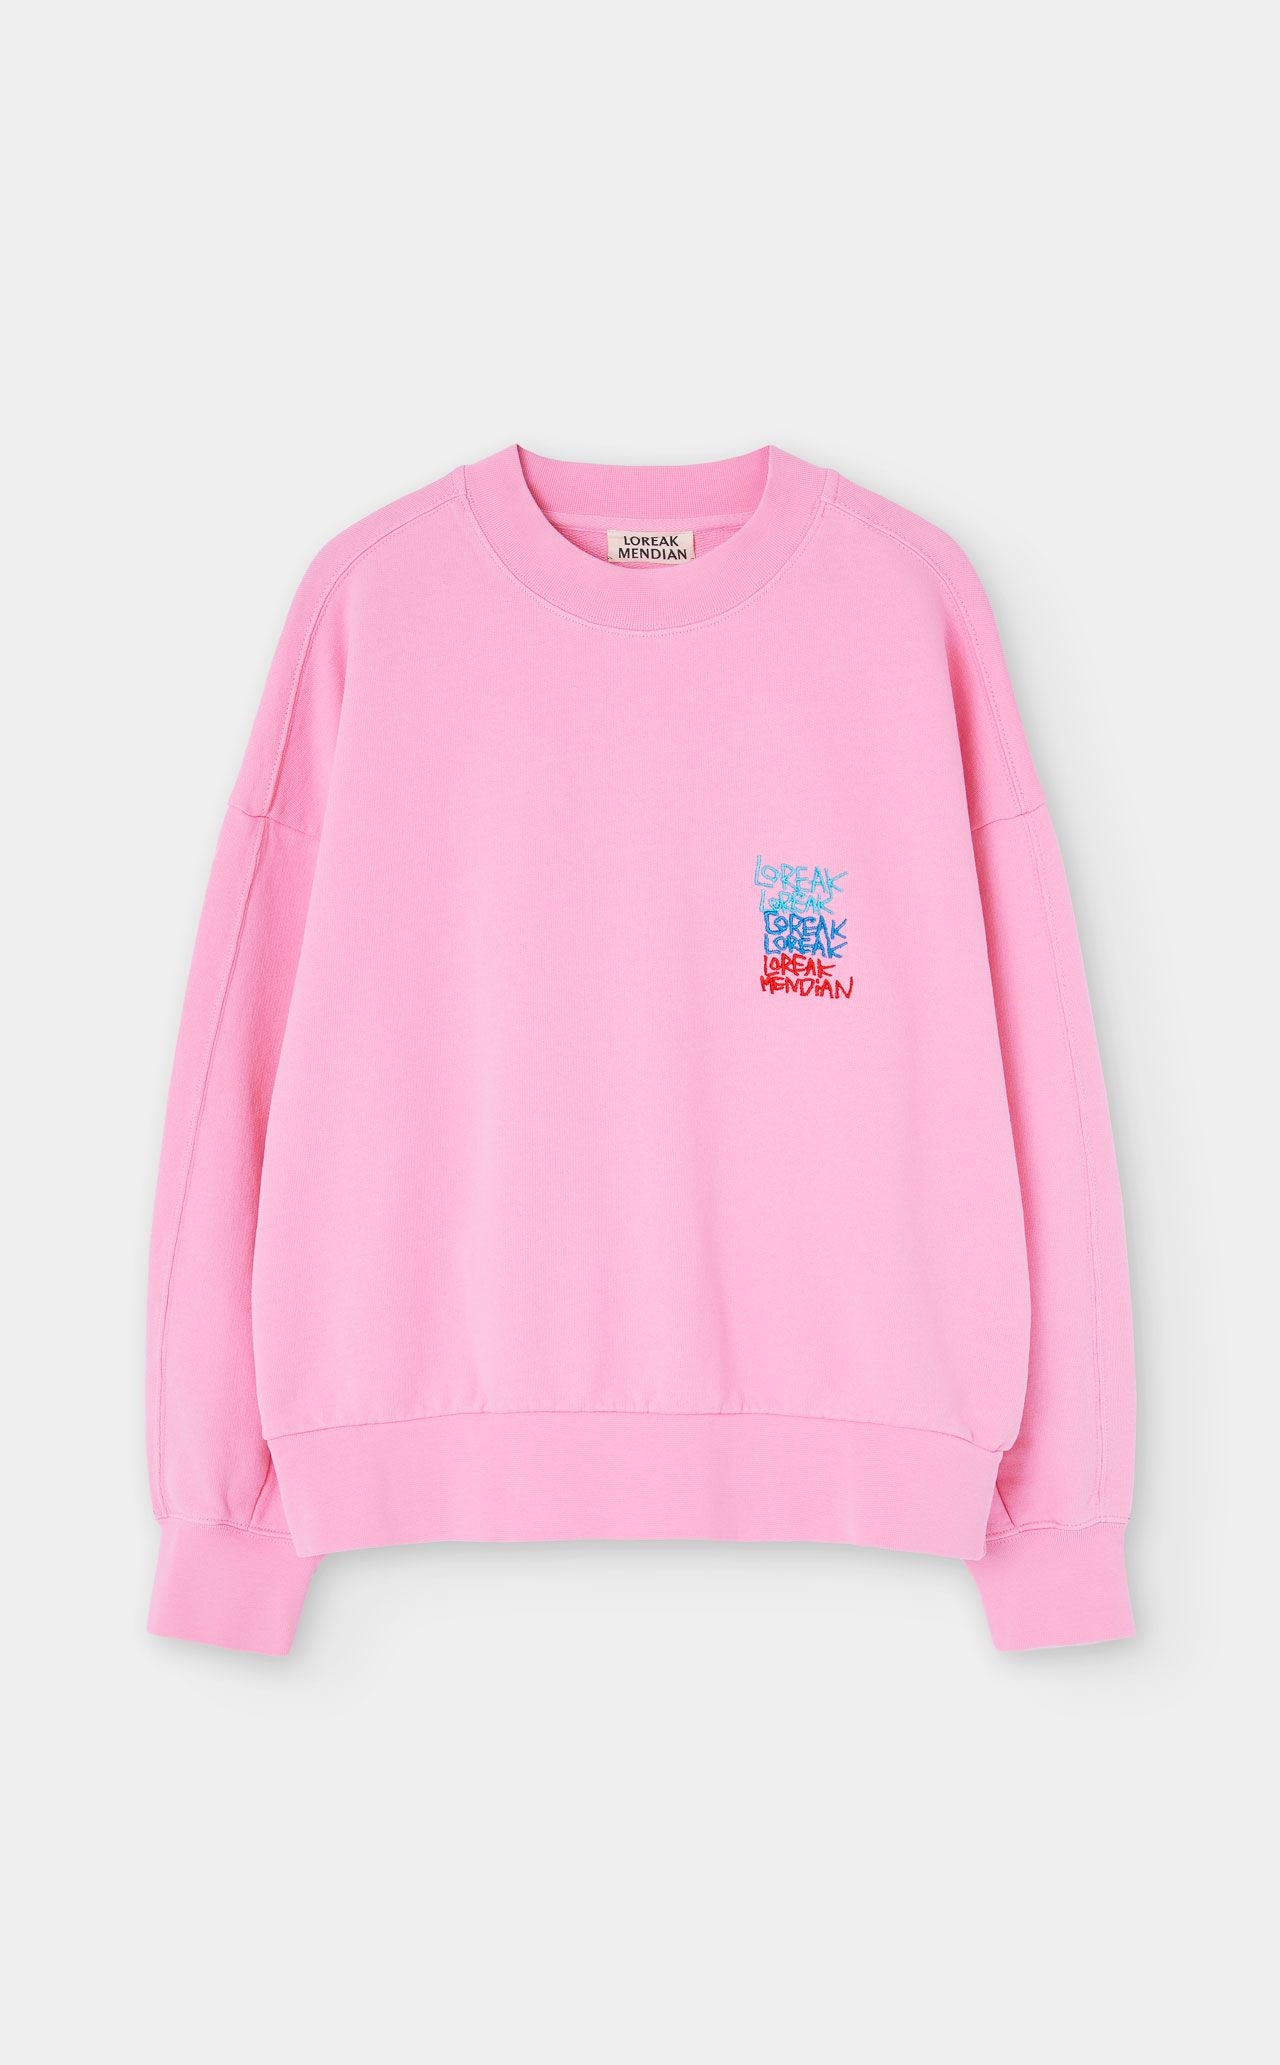 Pink relaxed fit crewneck sweatshirt with logo on right side chest